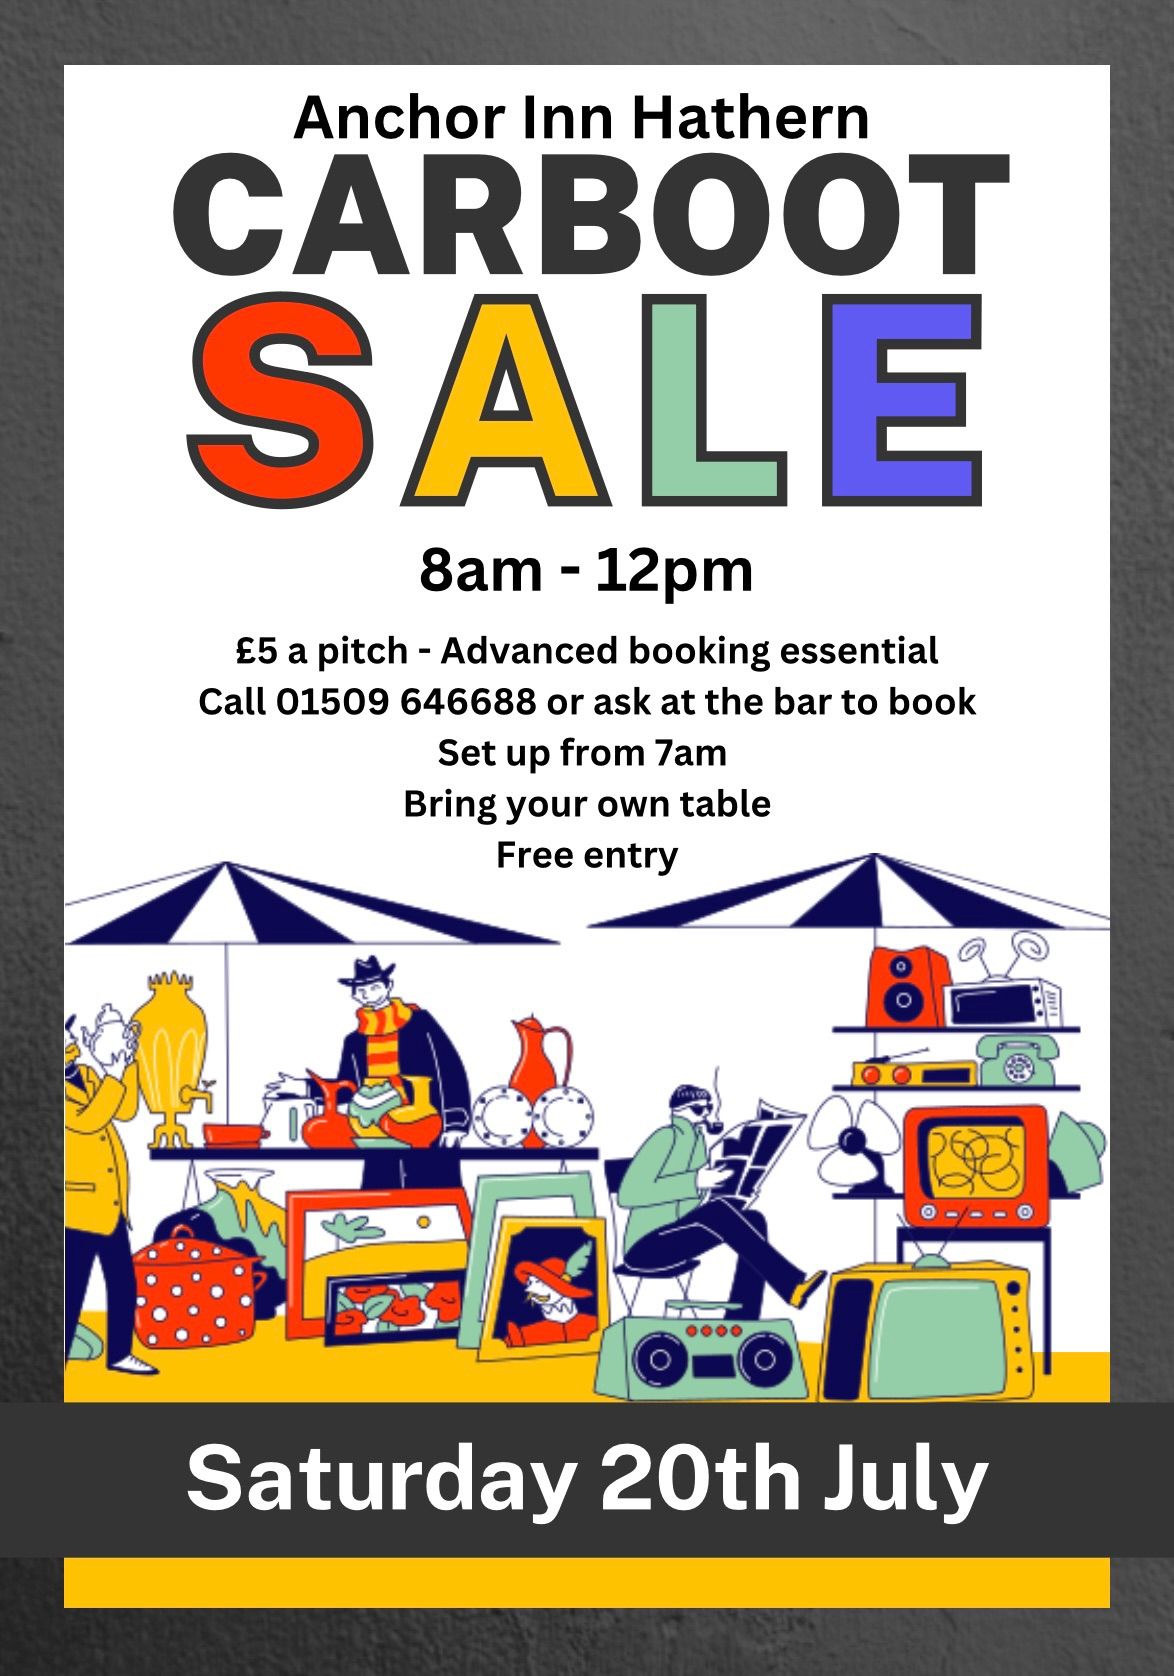 CARBOOT SALE!!